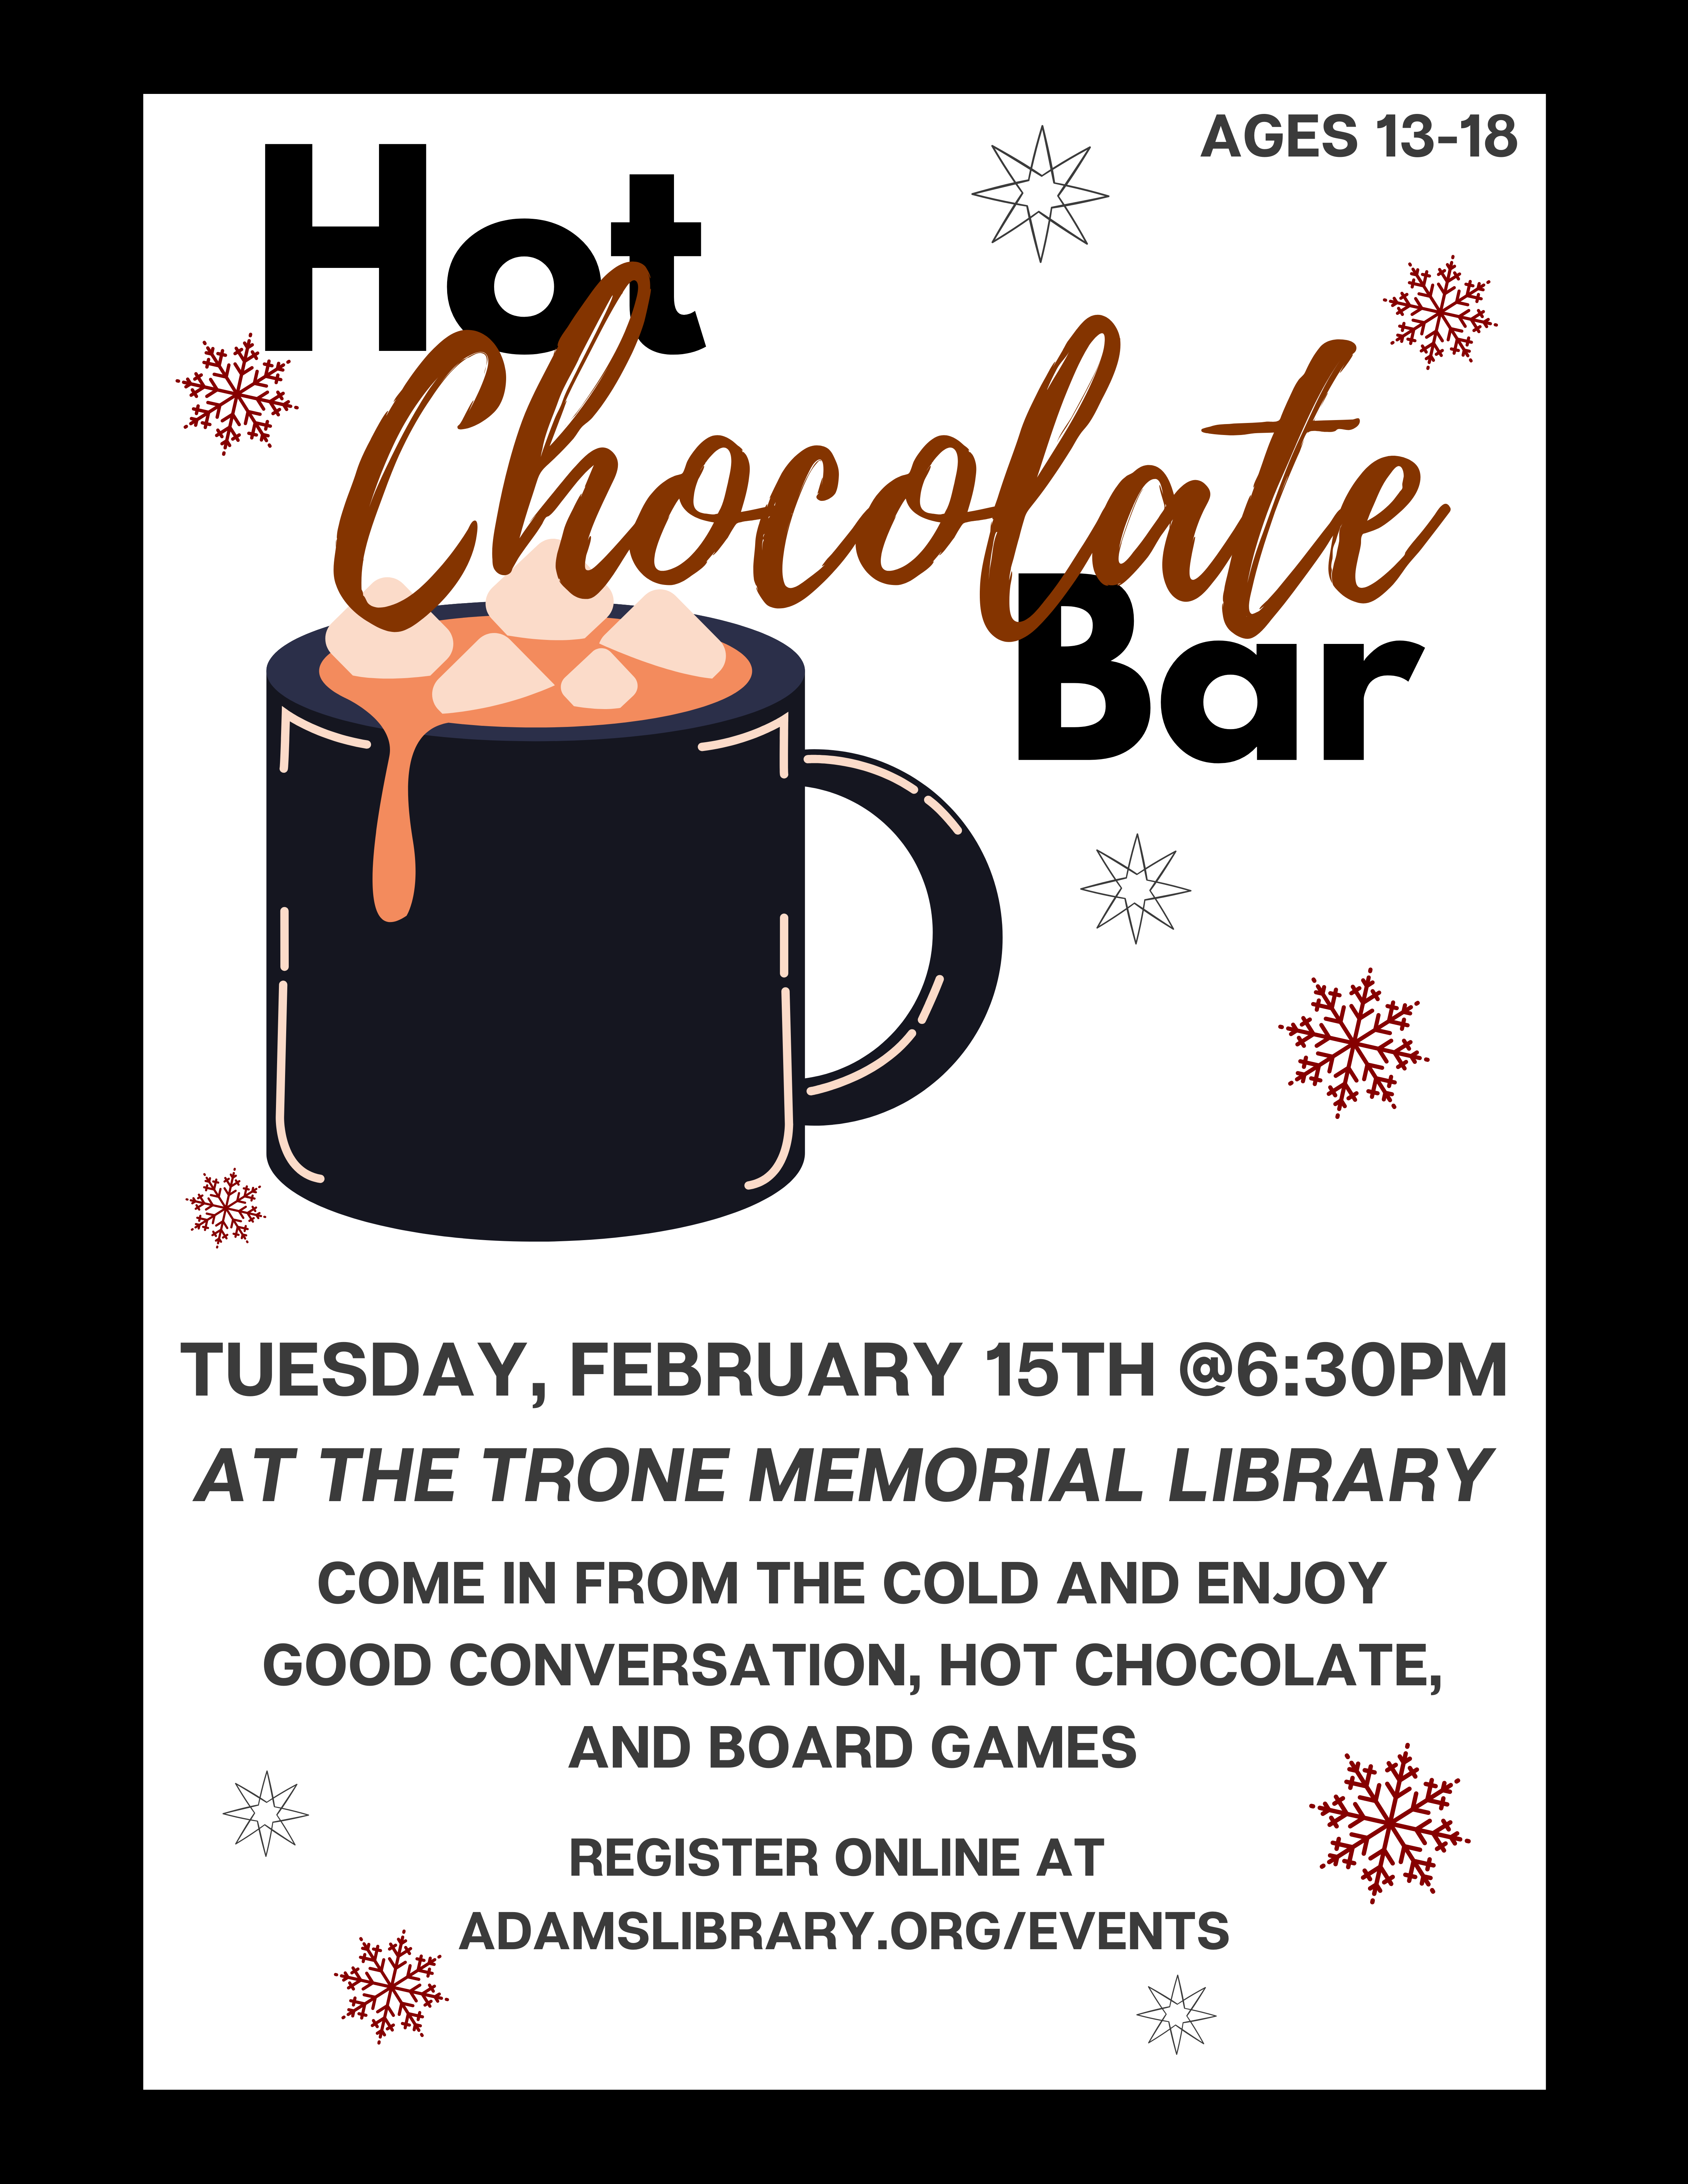 Image of a mug of hot chocolate with text reading: "Hot Chocolate Bar: Come in from the cold and enjoy hot chocolate, good company, and board games. Ages 13-18. At the Trone Memorial Library, Februrary 15th at 6:30pm."